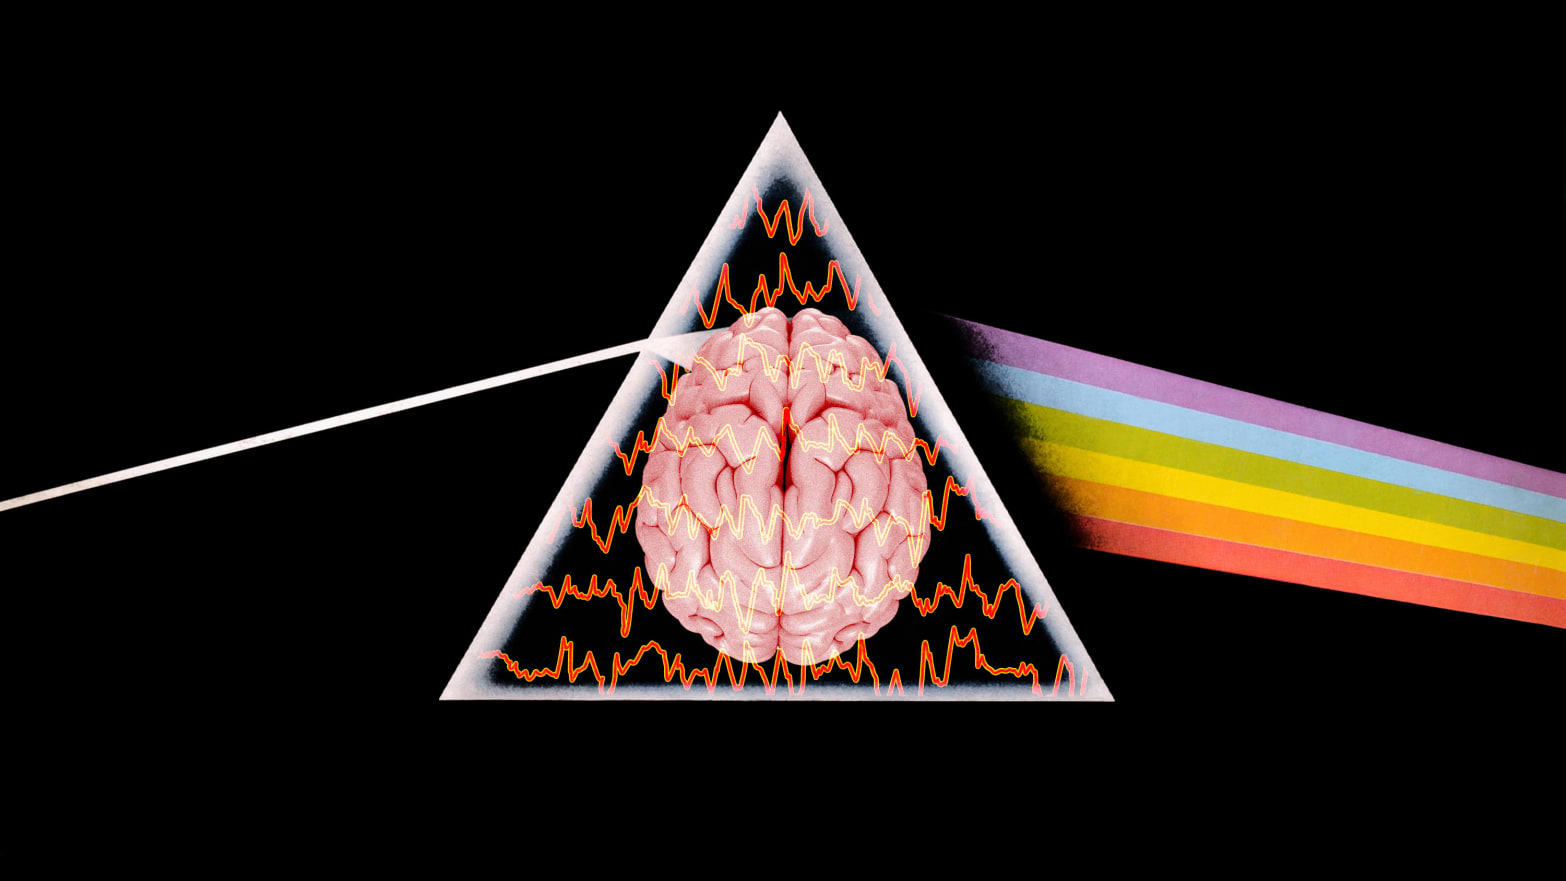 An illustration that includes photos of The Dark Side of The Moon, Brain Waves, and a Brain